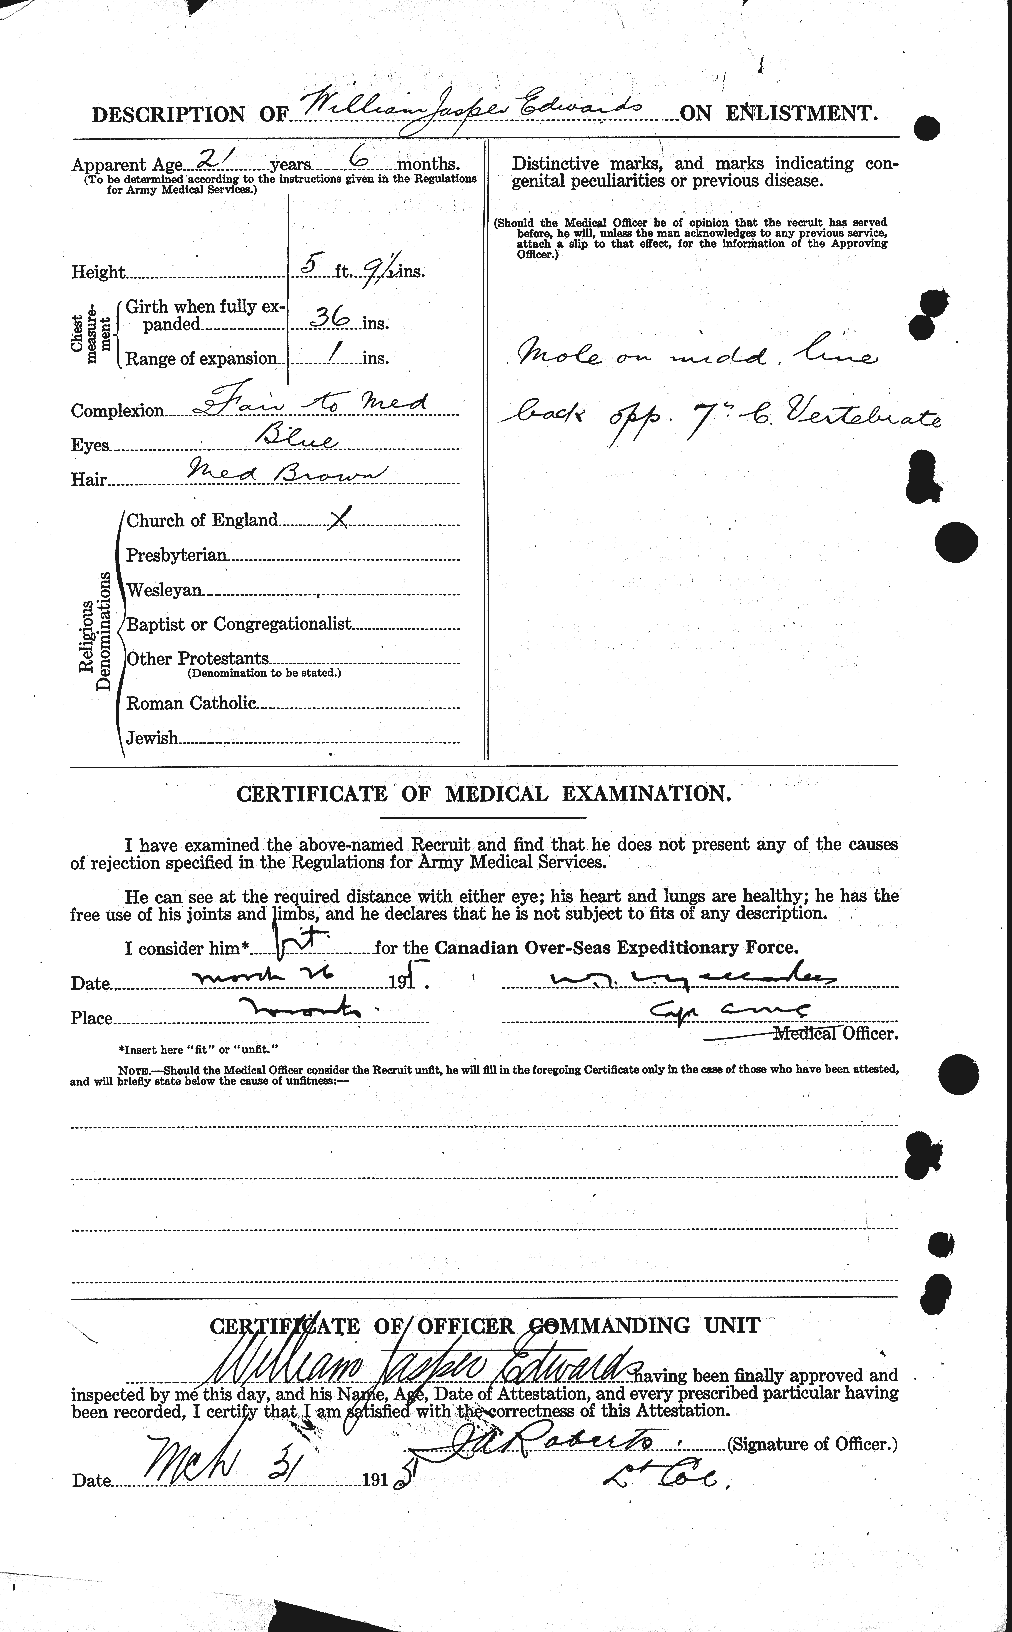 Personnel Records of the First World War - CEF 311923b